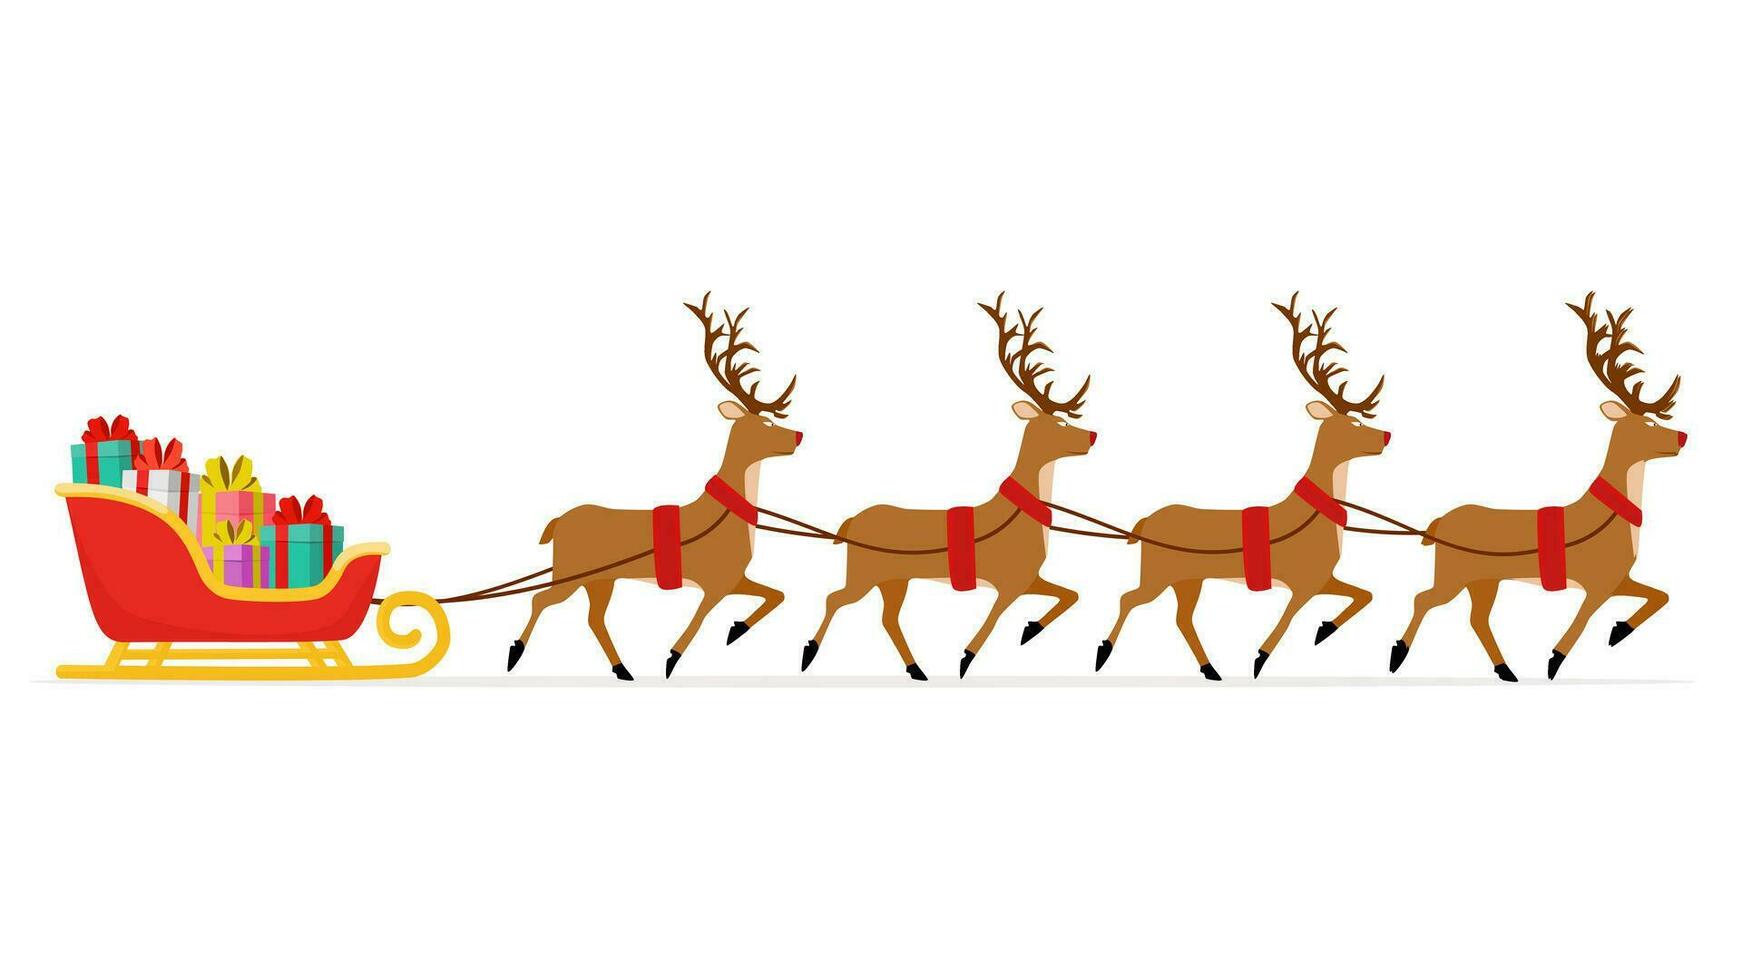 Sleigh with Presents and Reindeer on Christmas vector illustration